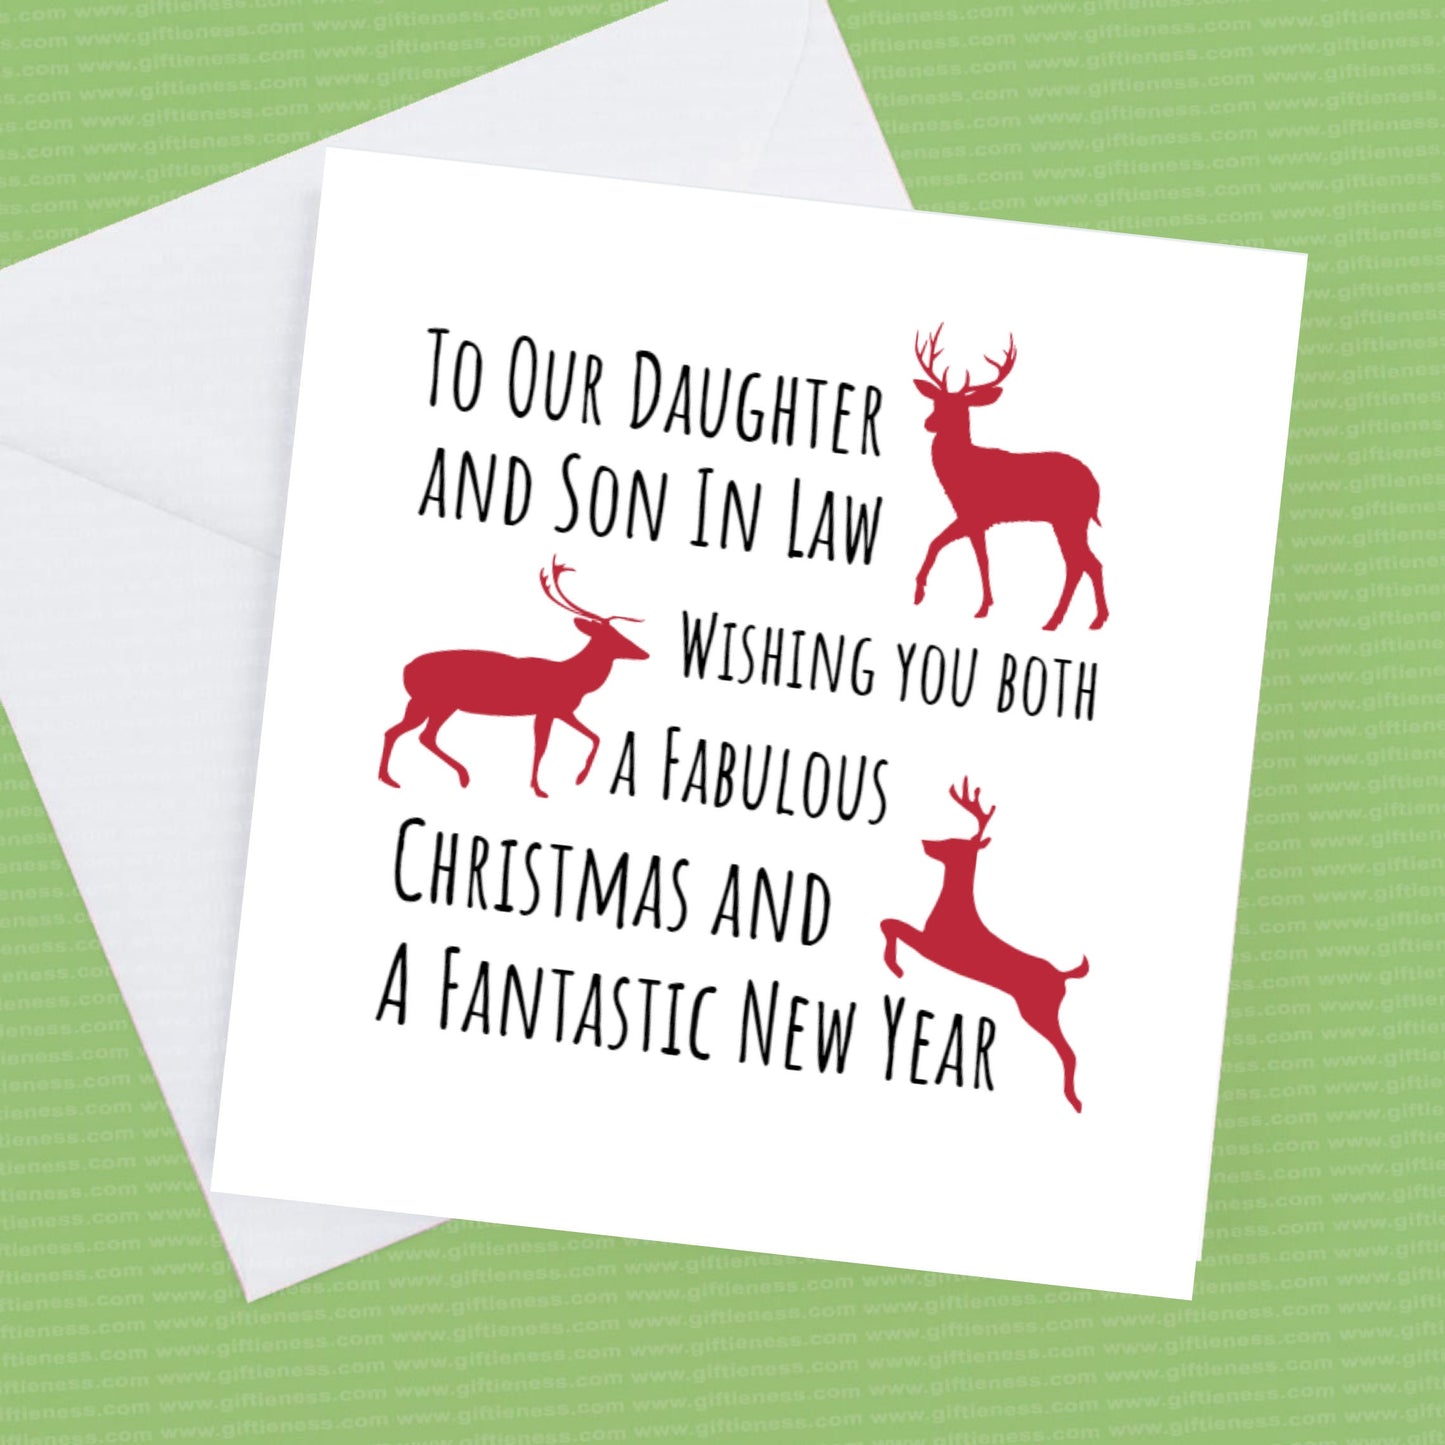 To Our Daughter and Son in Law Christmas card, can be changed to any relations